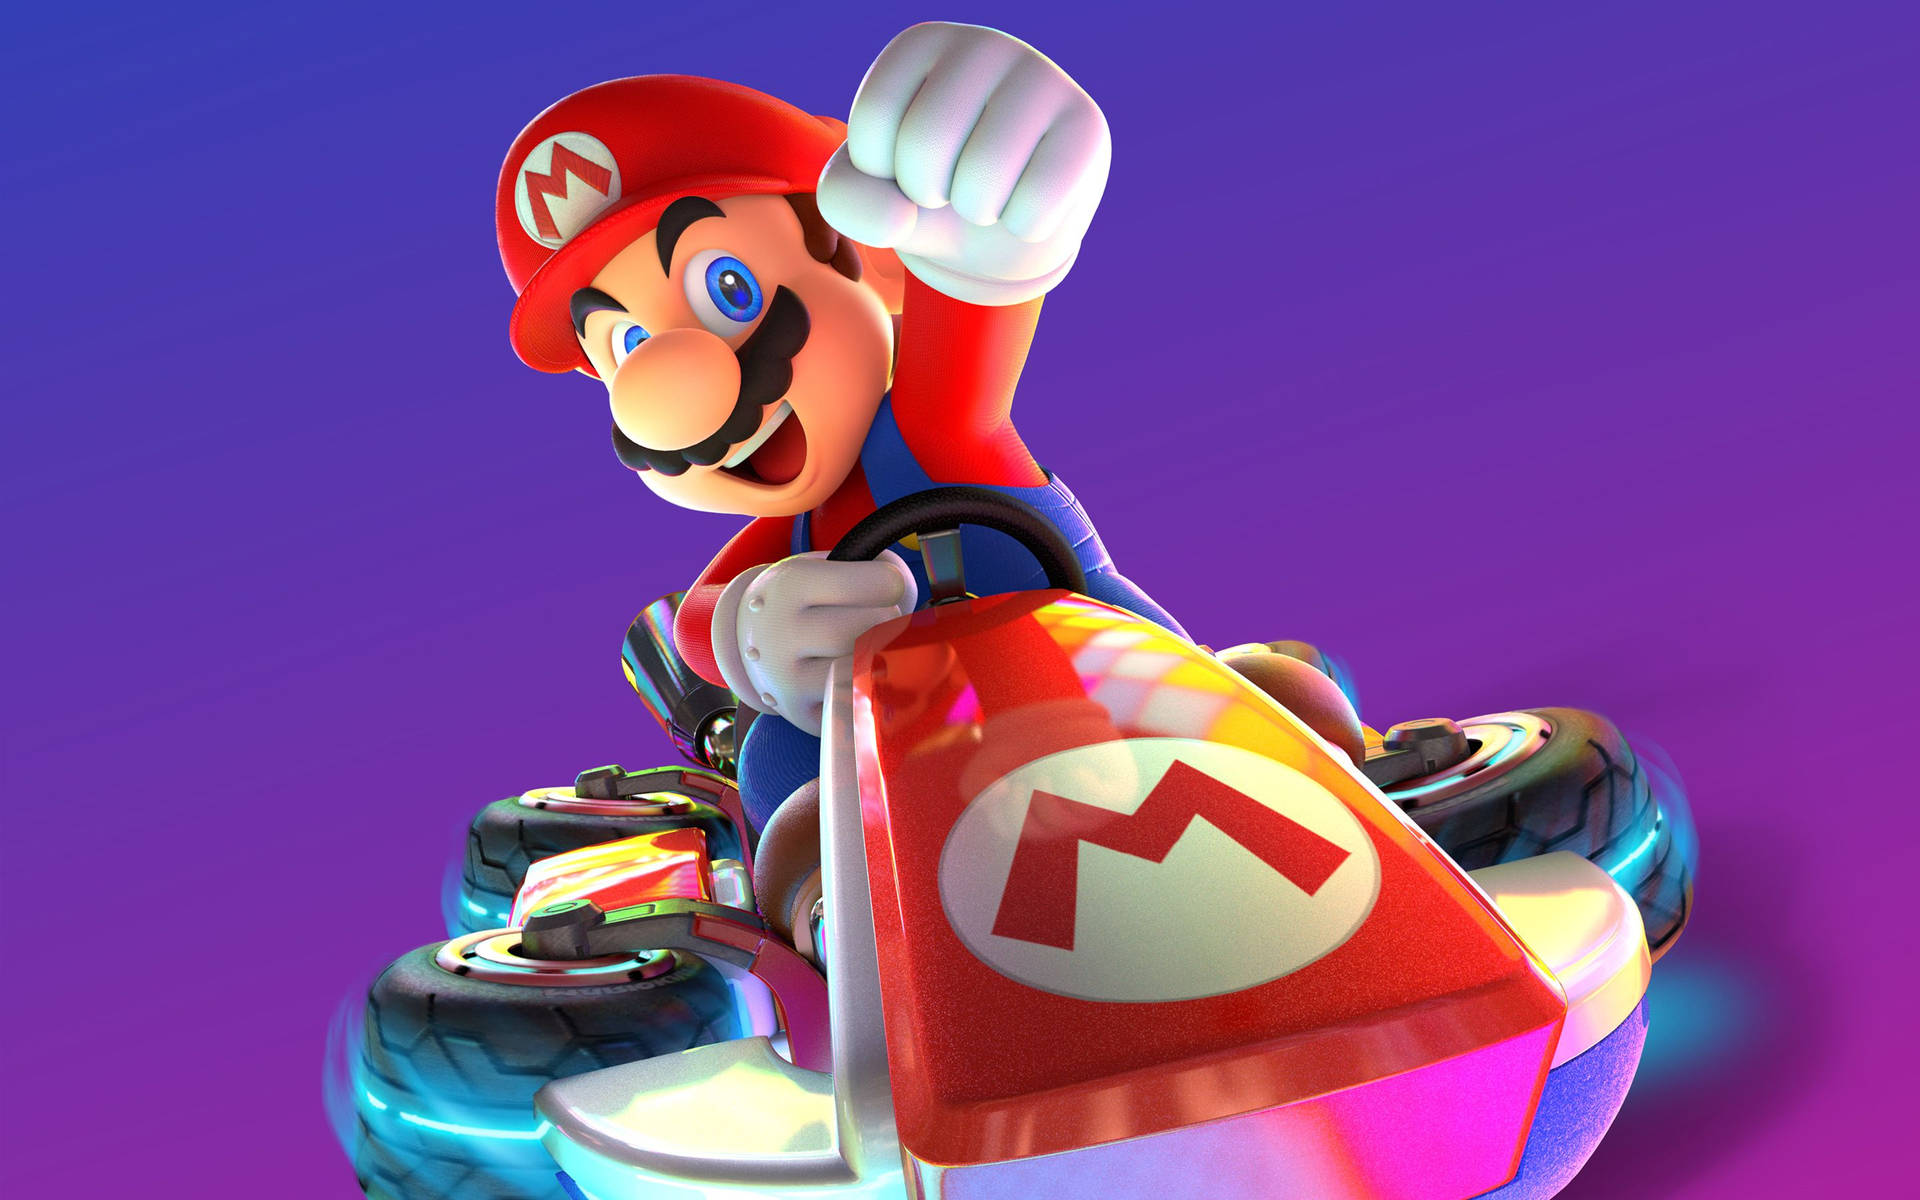 Challenge your friends to a race with Mario Kart 8 Deluxe Wallpaper